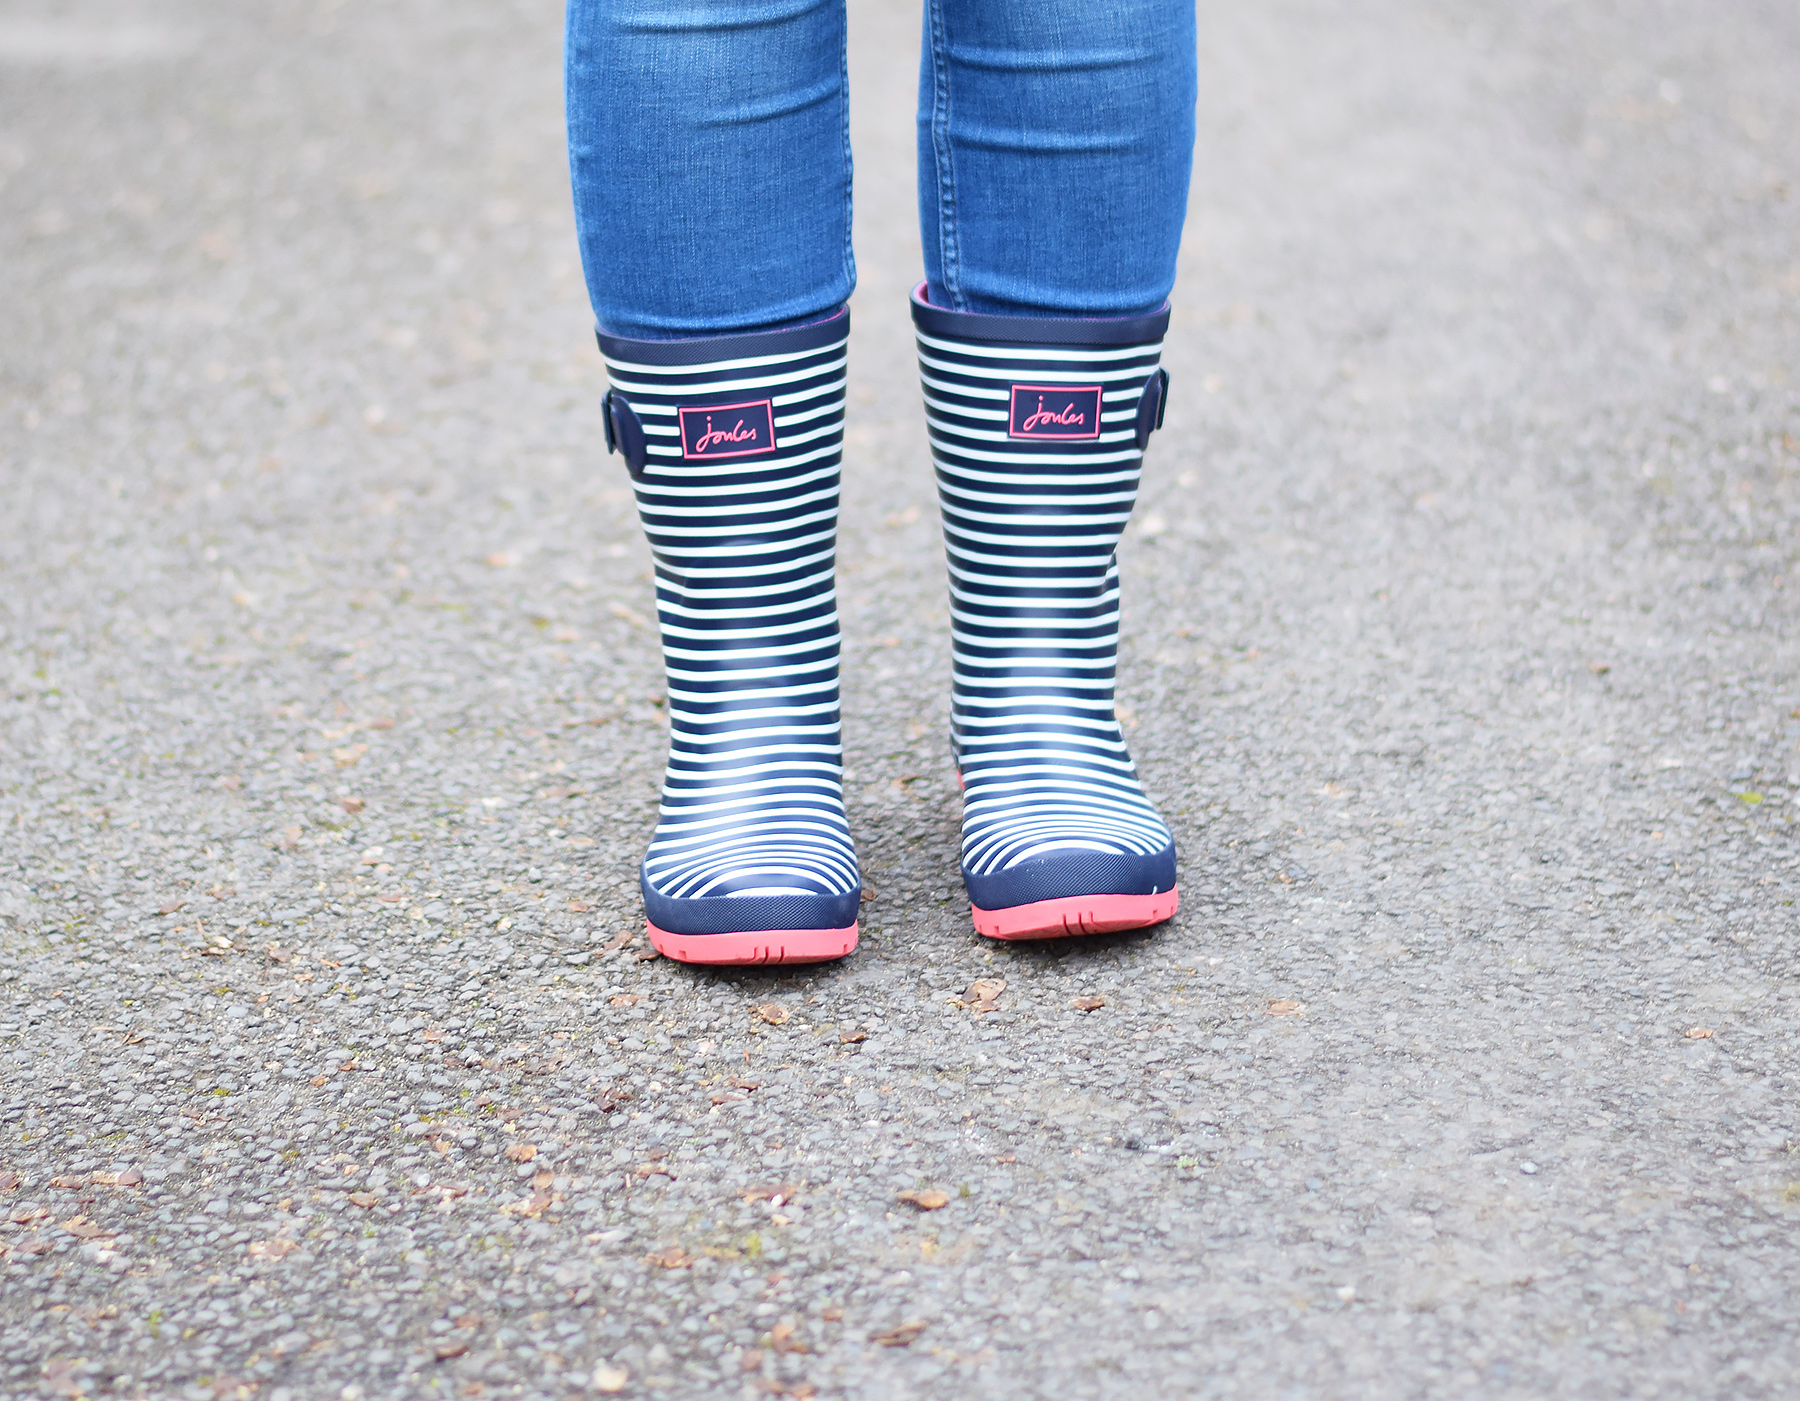 Joules Molly Printed Mid-Height Wellies